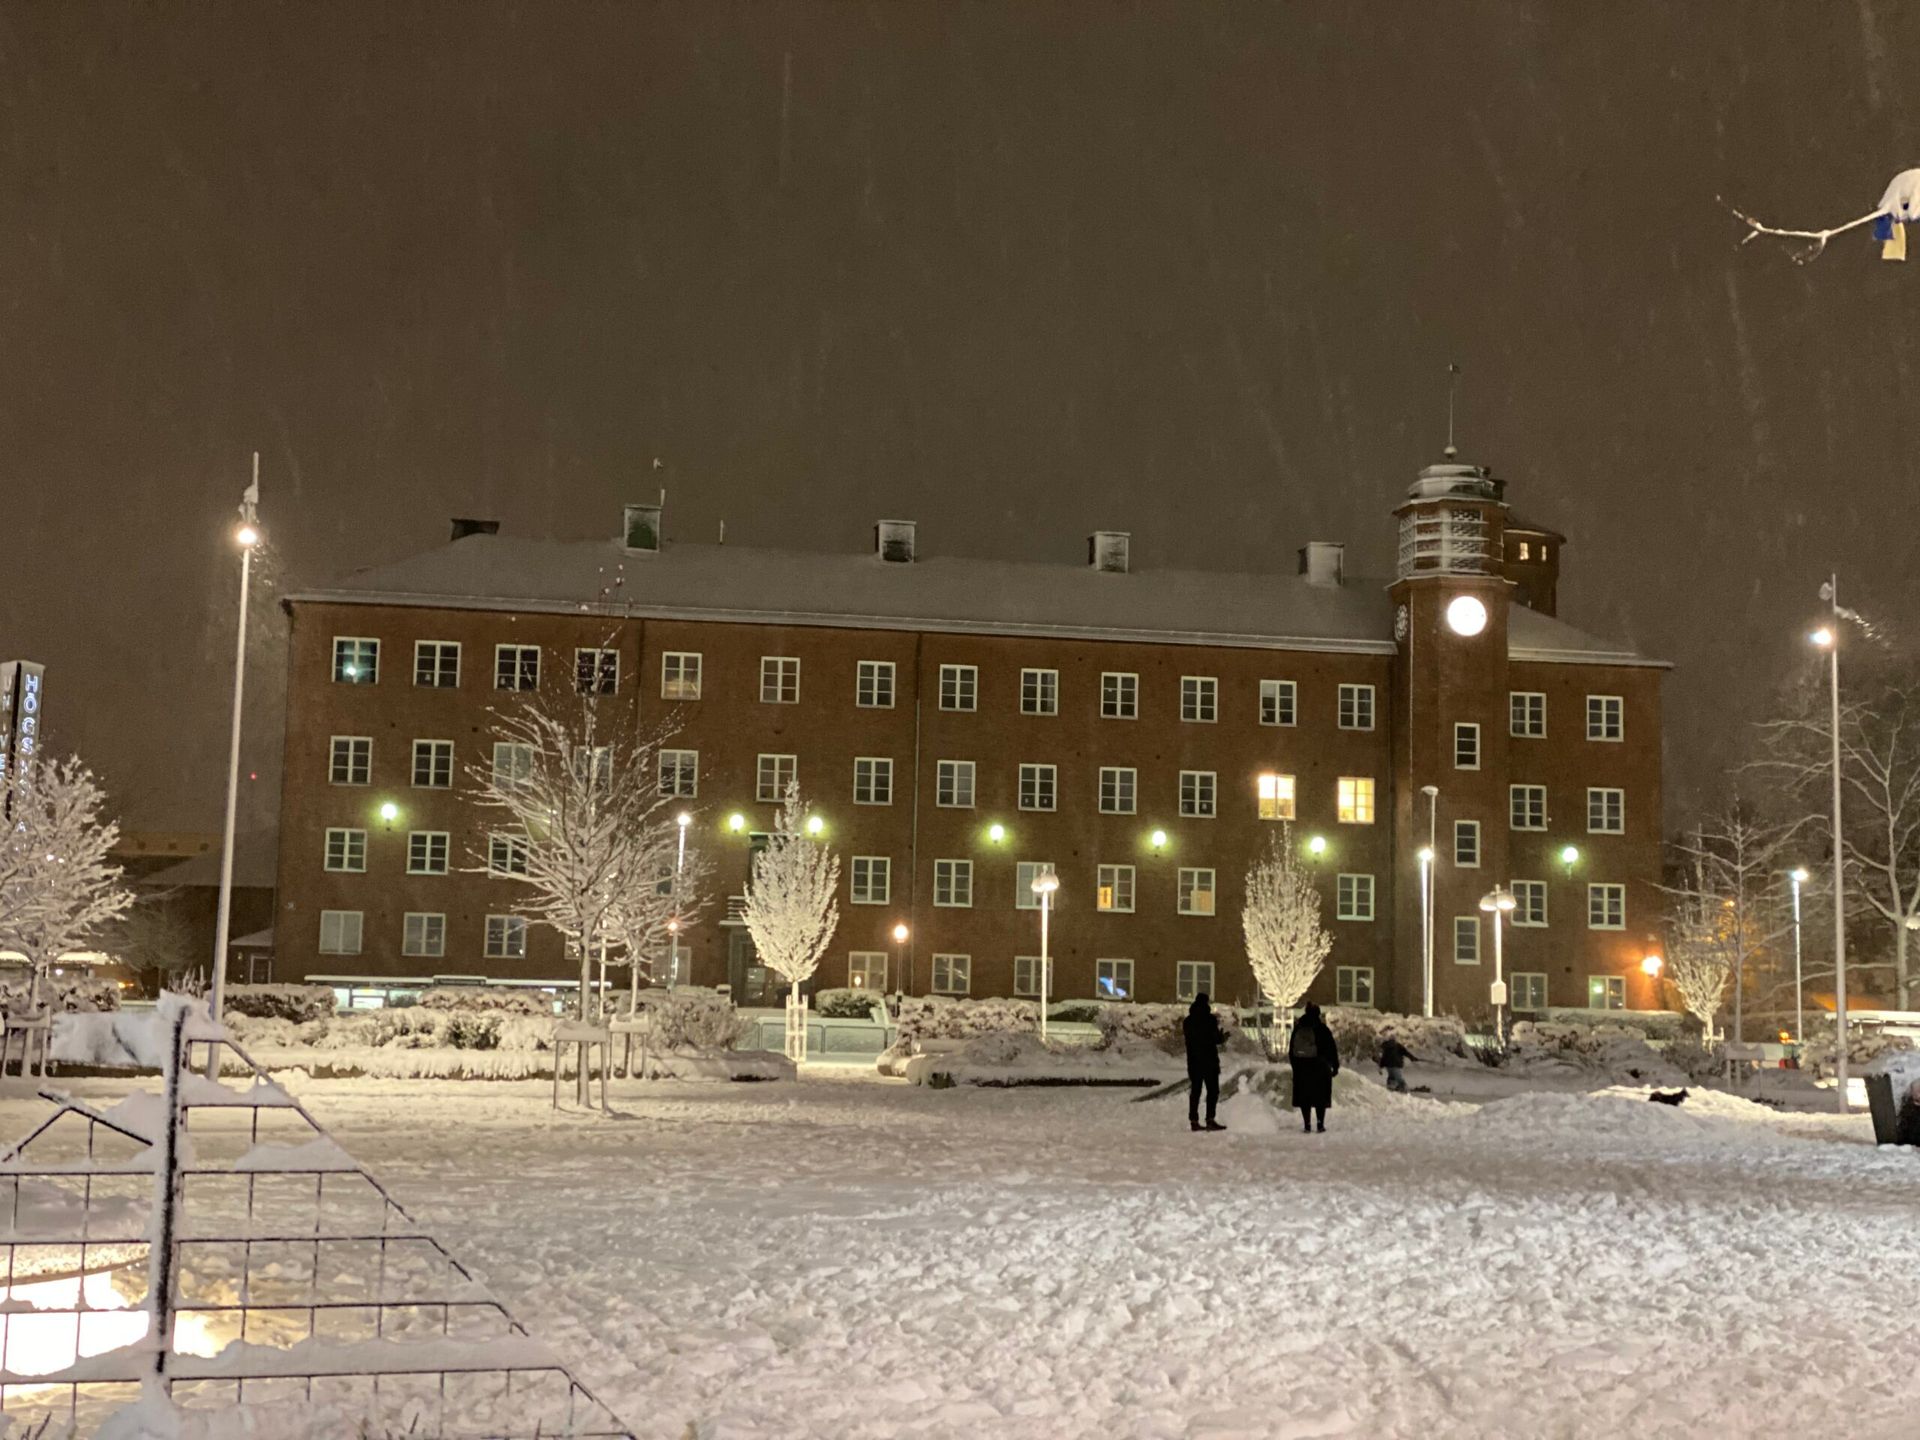 Outside University West dueing a snowy winter evening